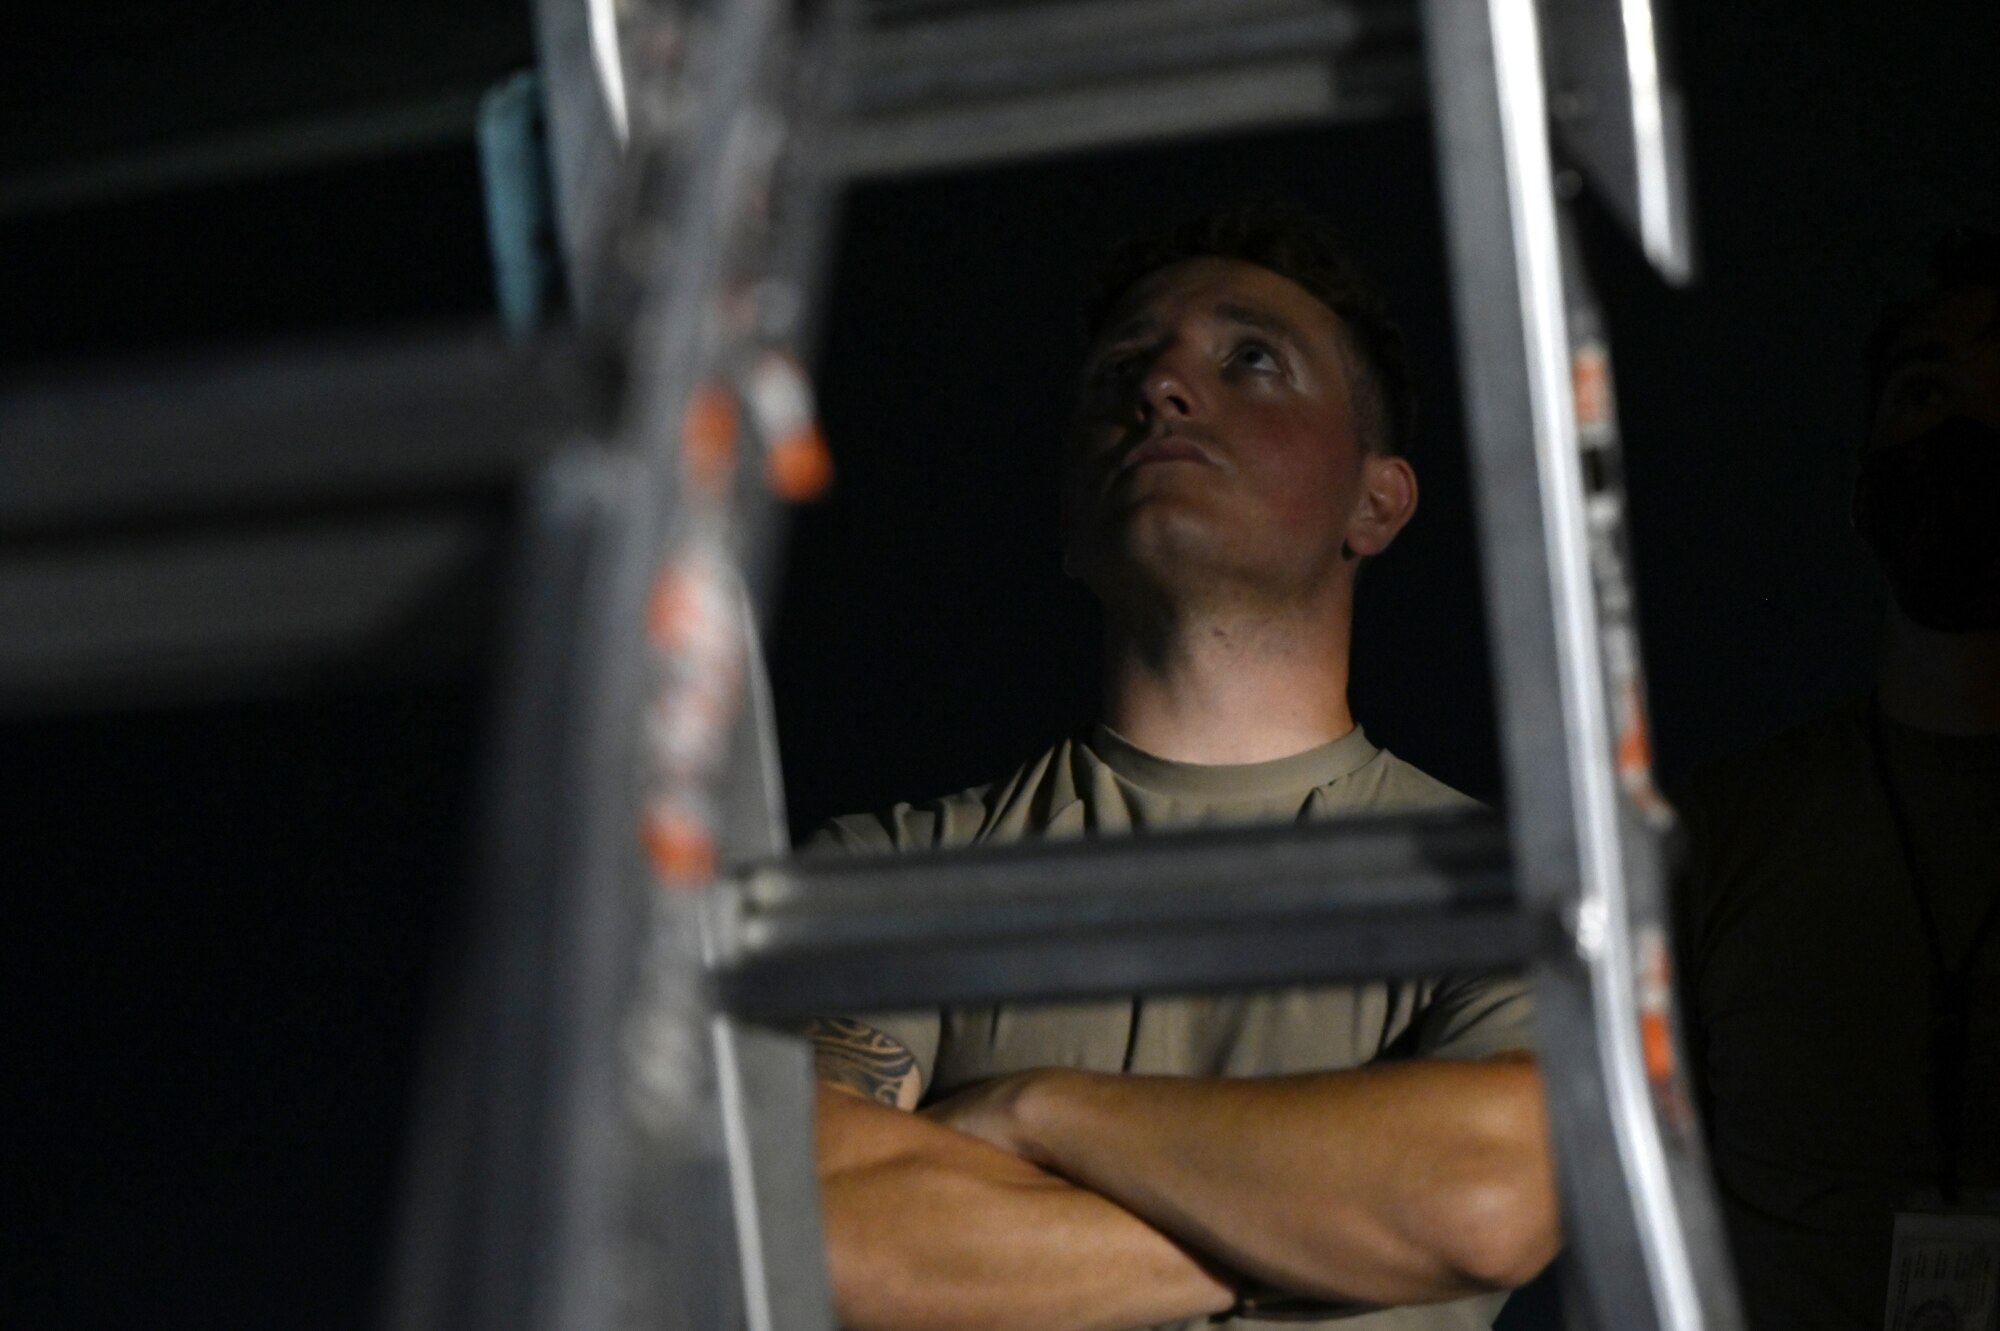 U.S. Air Force Senior Airman Archie Achadinha, 20th Aircraft Maintenance Unit crew chief, Barksdale Air Force Base, Louisiana, inspects a B-52 Stratofortress at Andersen Air Force Base, Guam, Aug. 26, 2021. Andersen acts as a staging point for the B-52 in support of Pacific Air Forces’ Bomber Task Force deployment, allowing commanders to address a variety of global challenges through the engagement of the bomber. (U.S. Air Force photo by Staff Sgt. Alysia Blake)